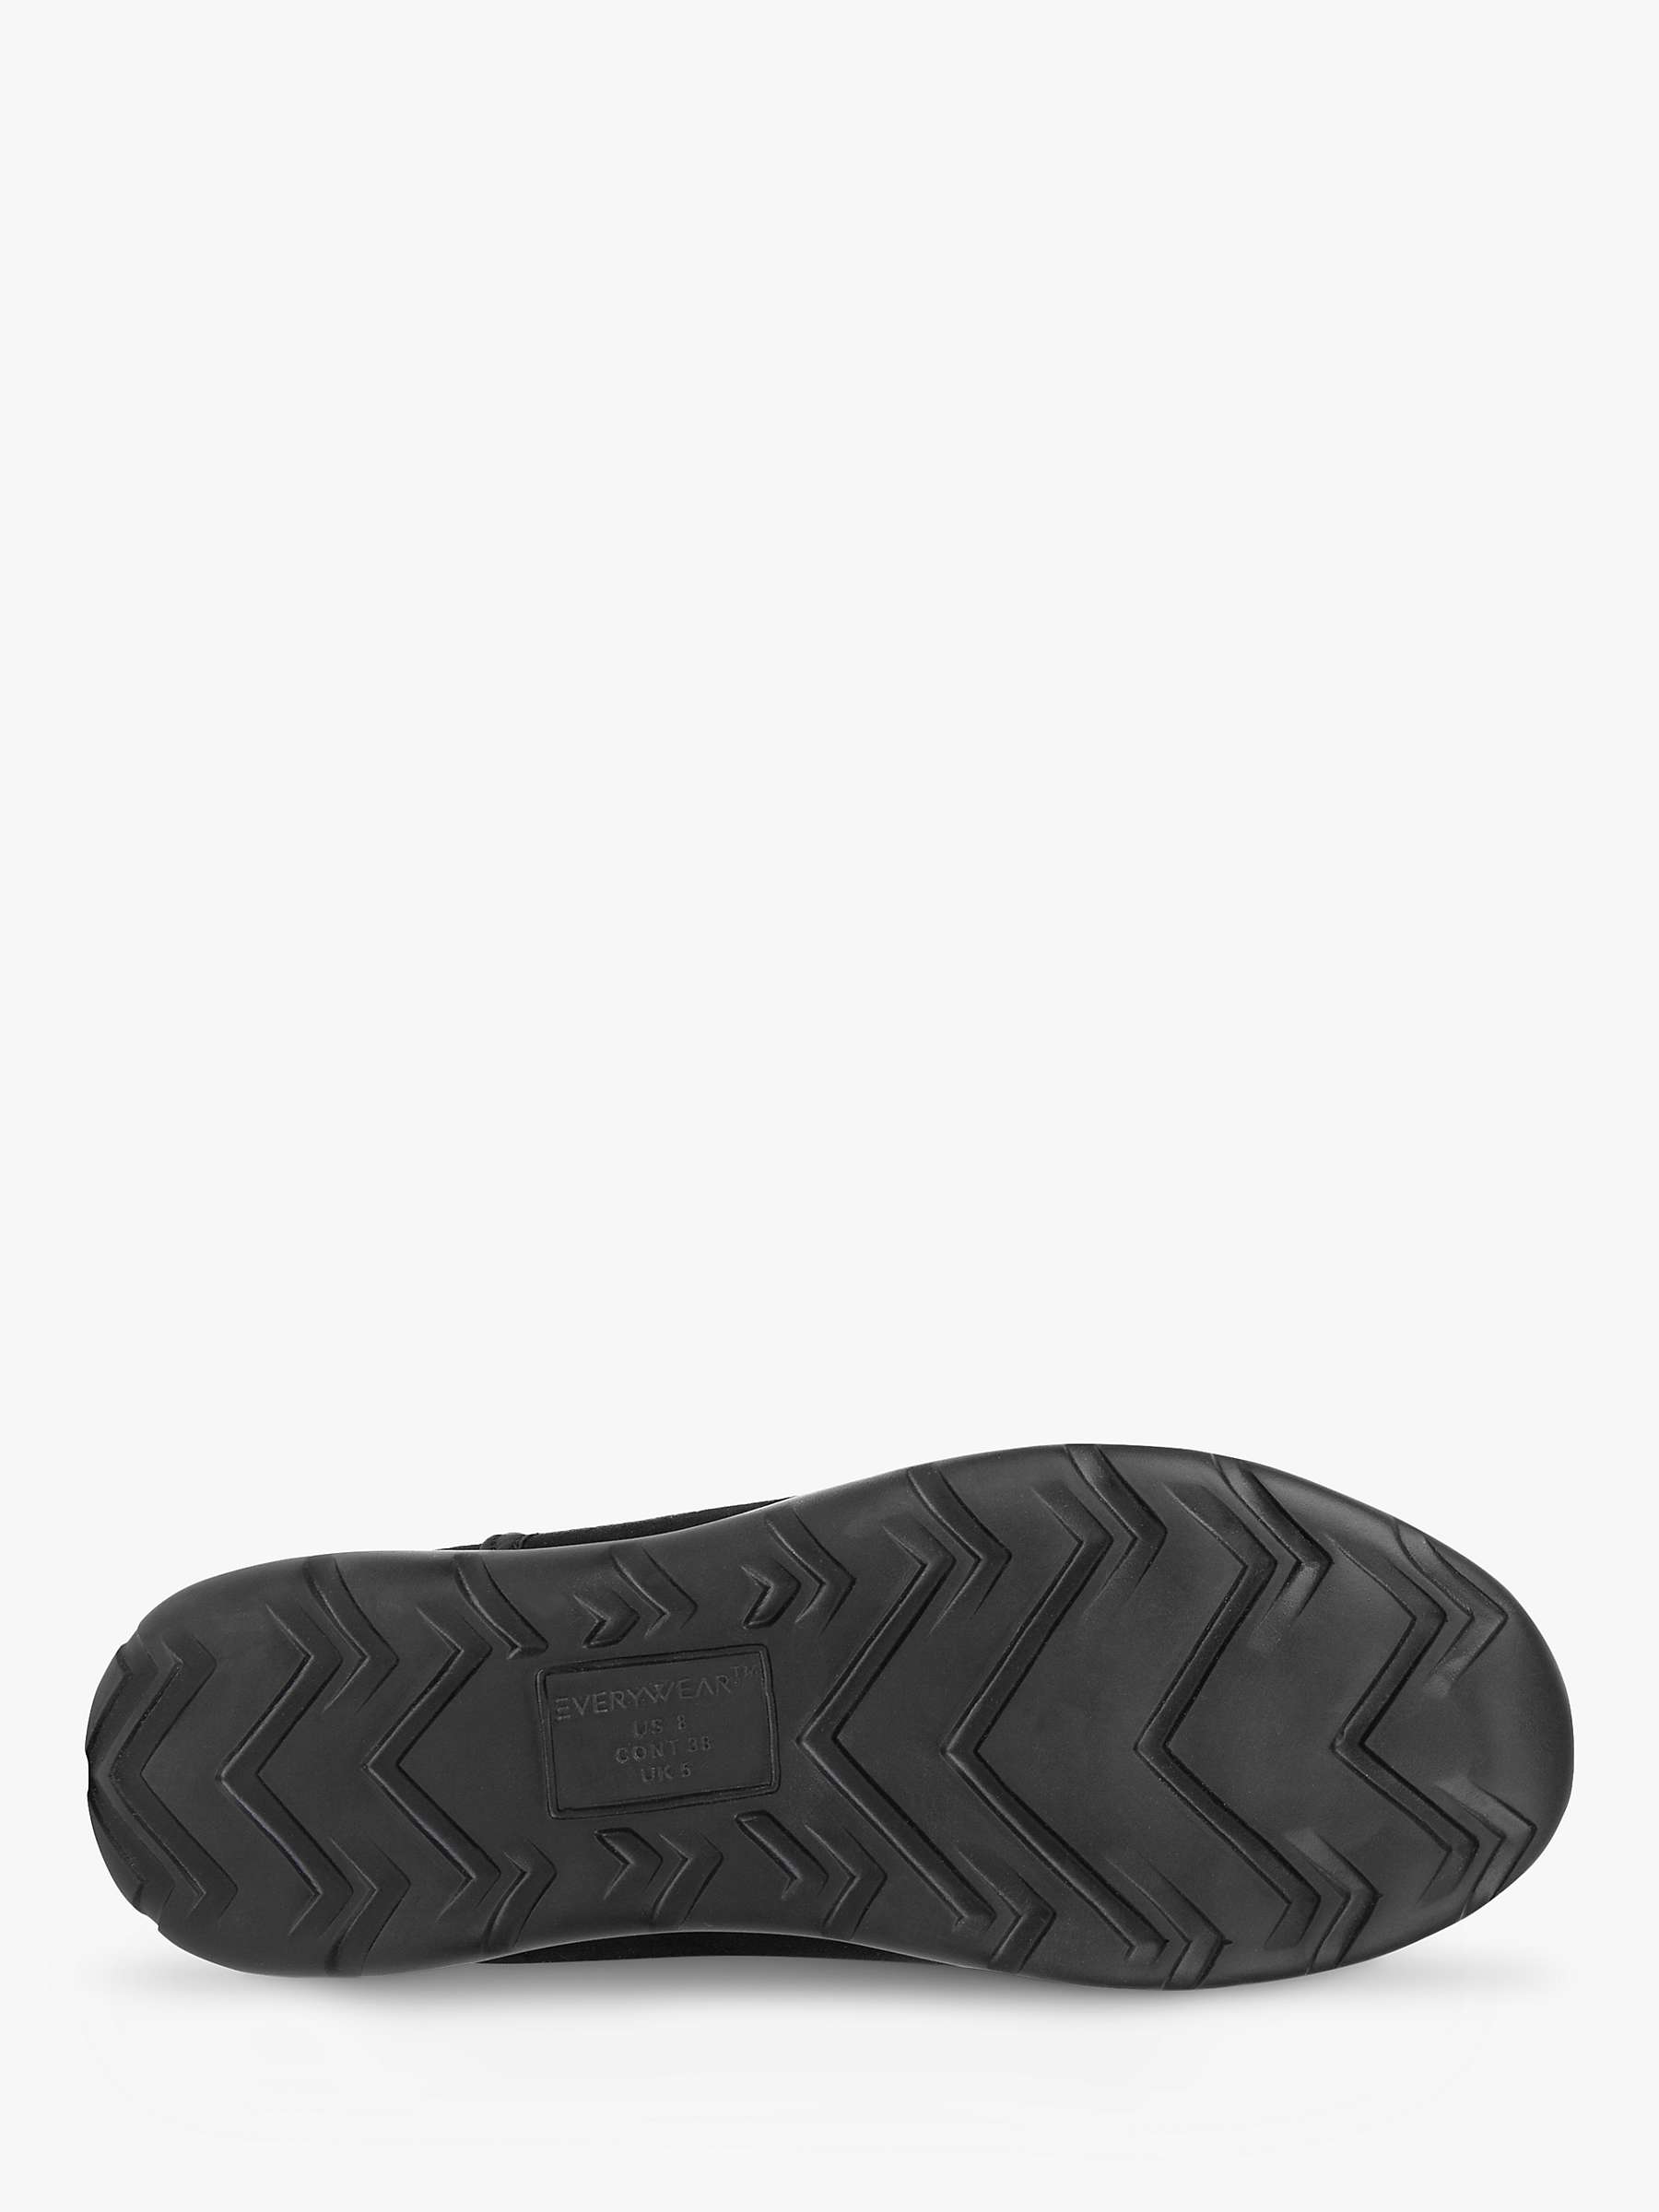 Buy totes Iso Flex Quilted Slipper Boots, Black Online at johnlewis.com